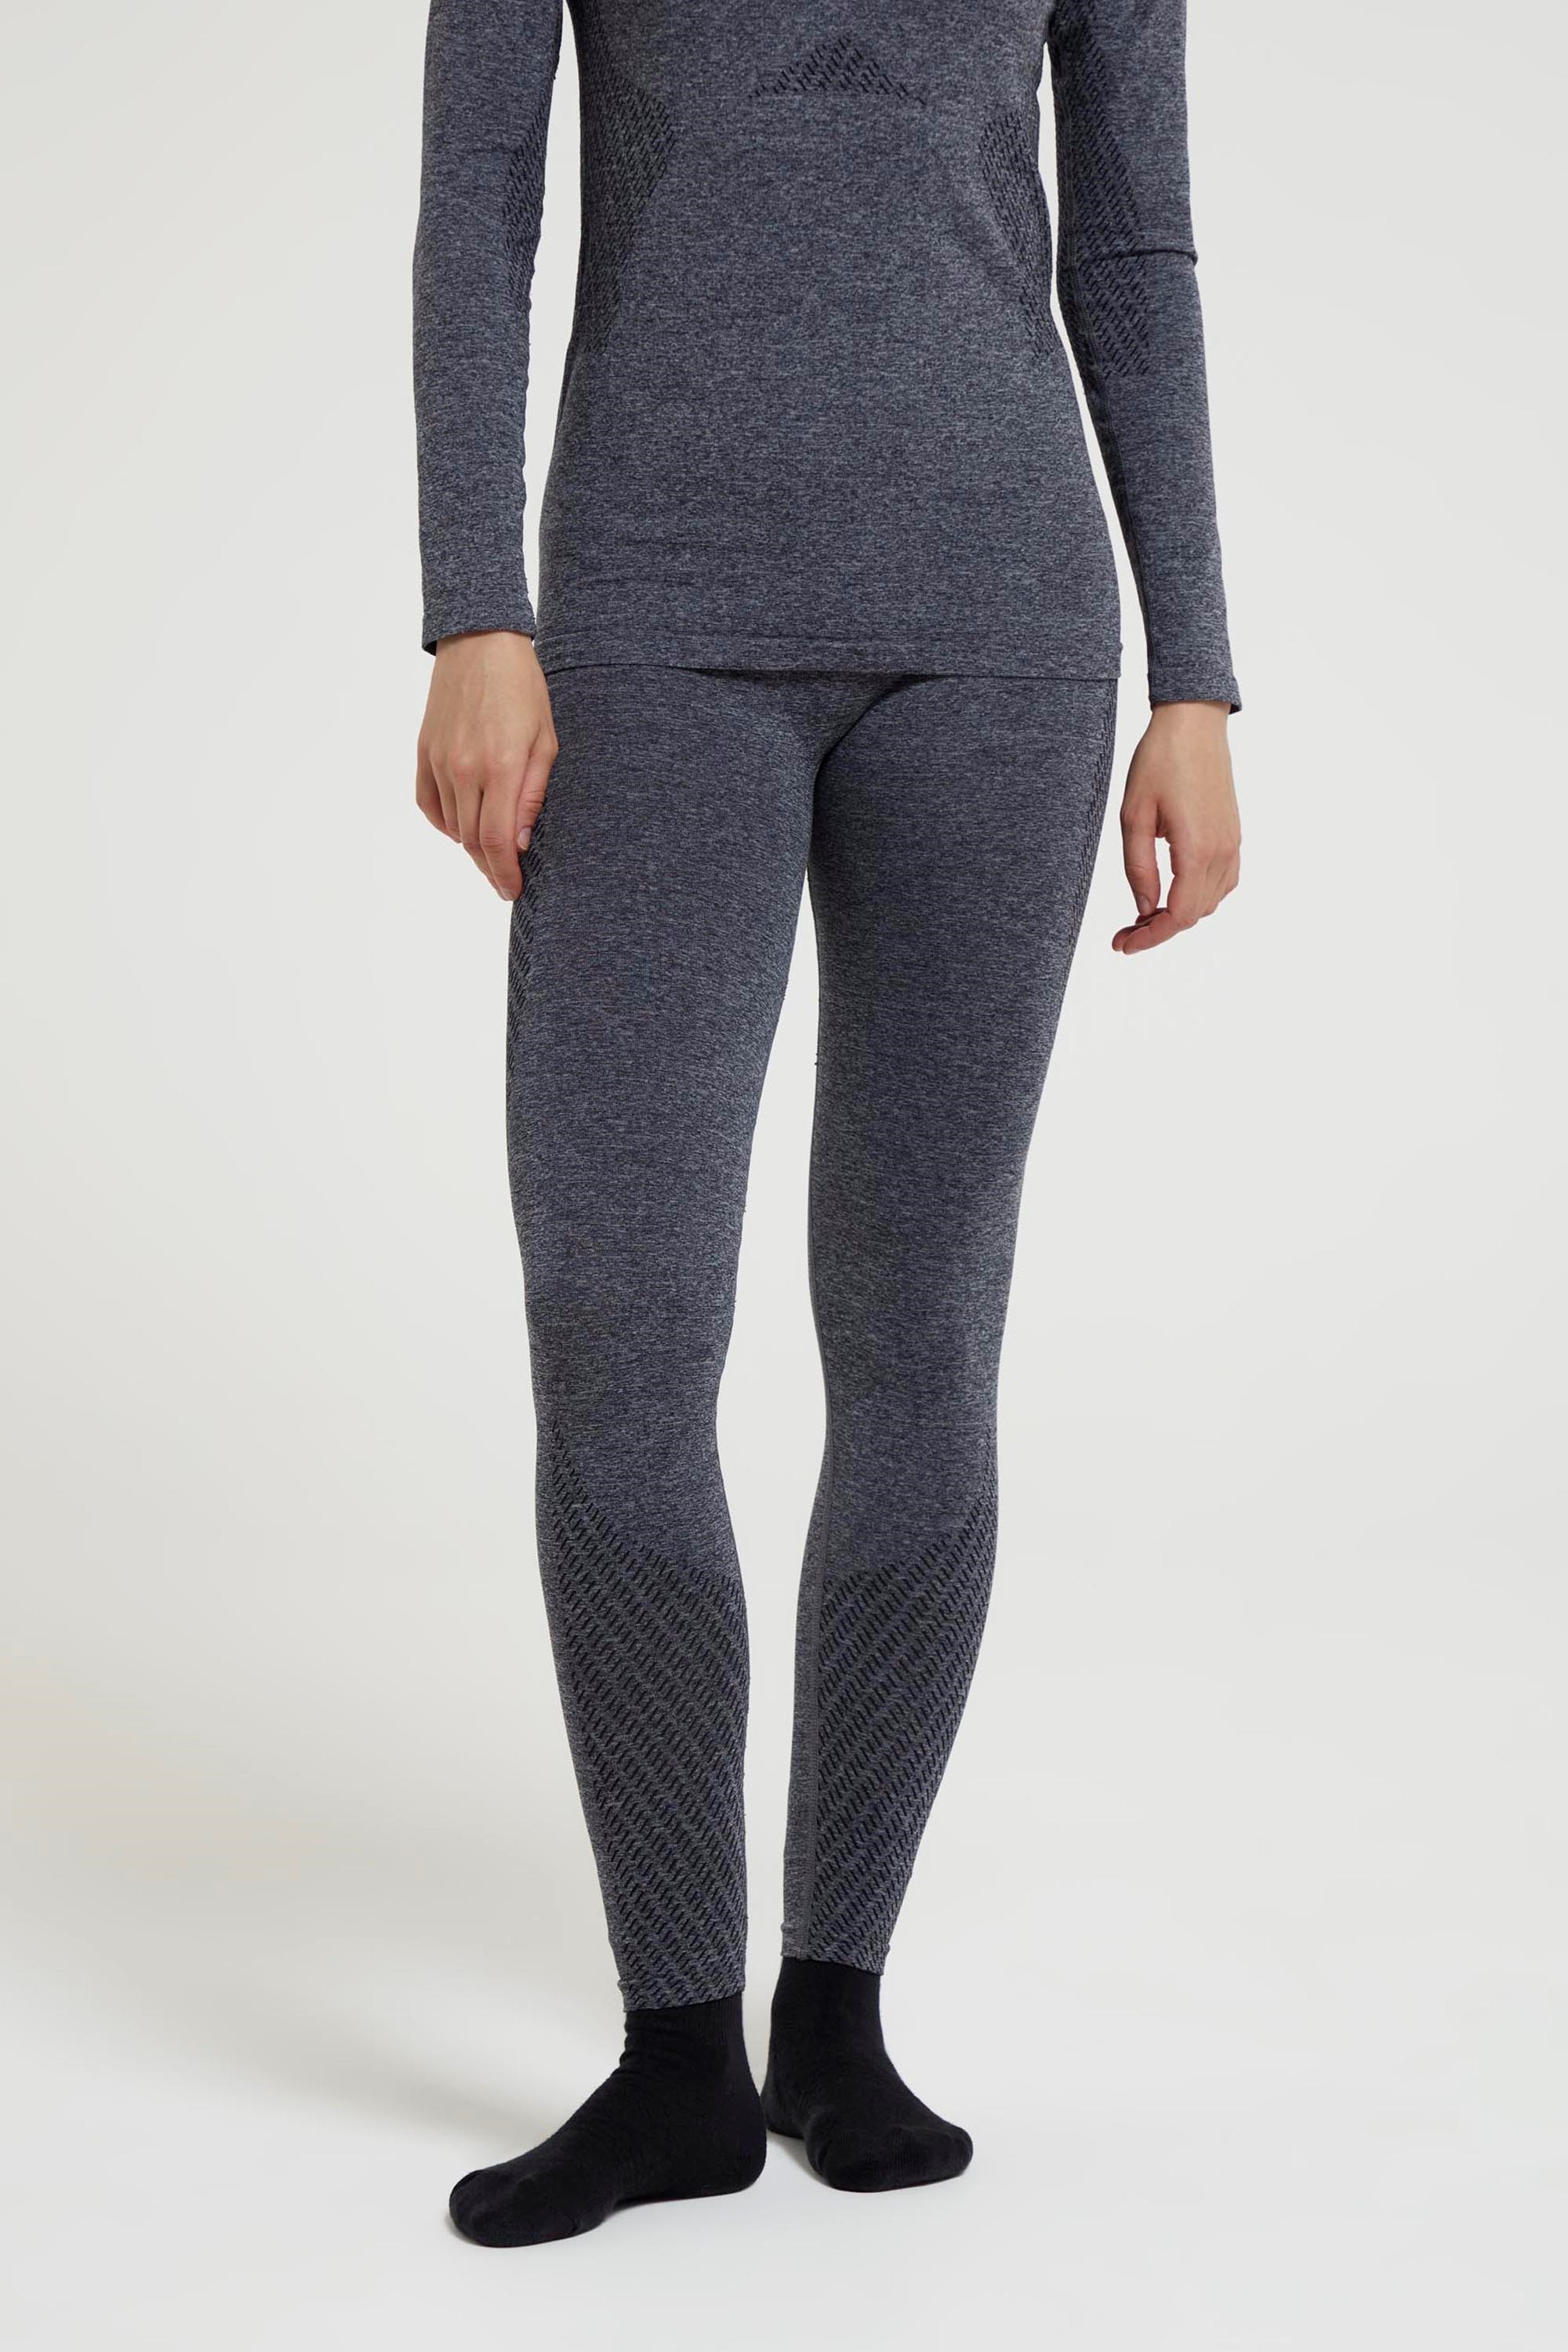 053321 OFF PISTE SEAMLESS WOMENS THERMAL PANT II